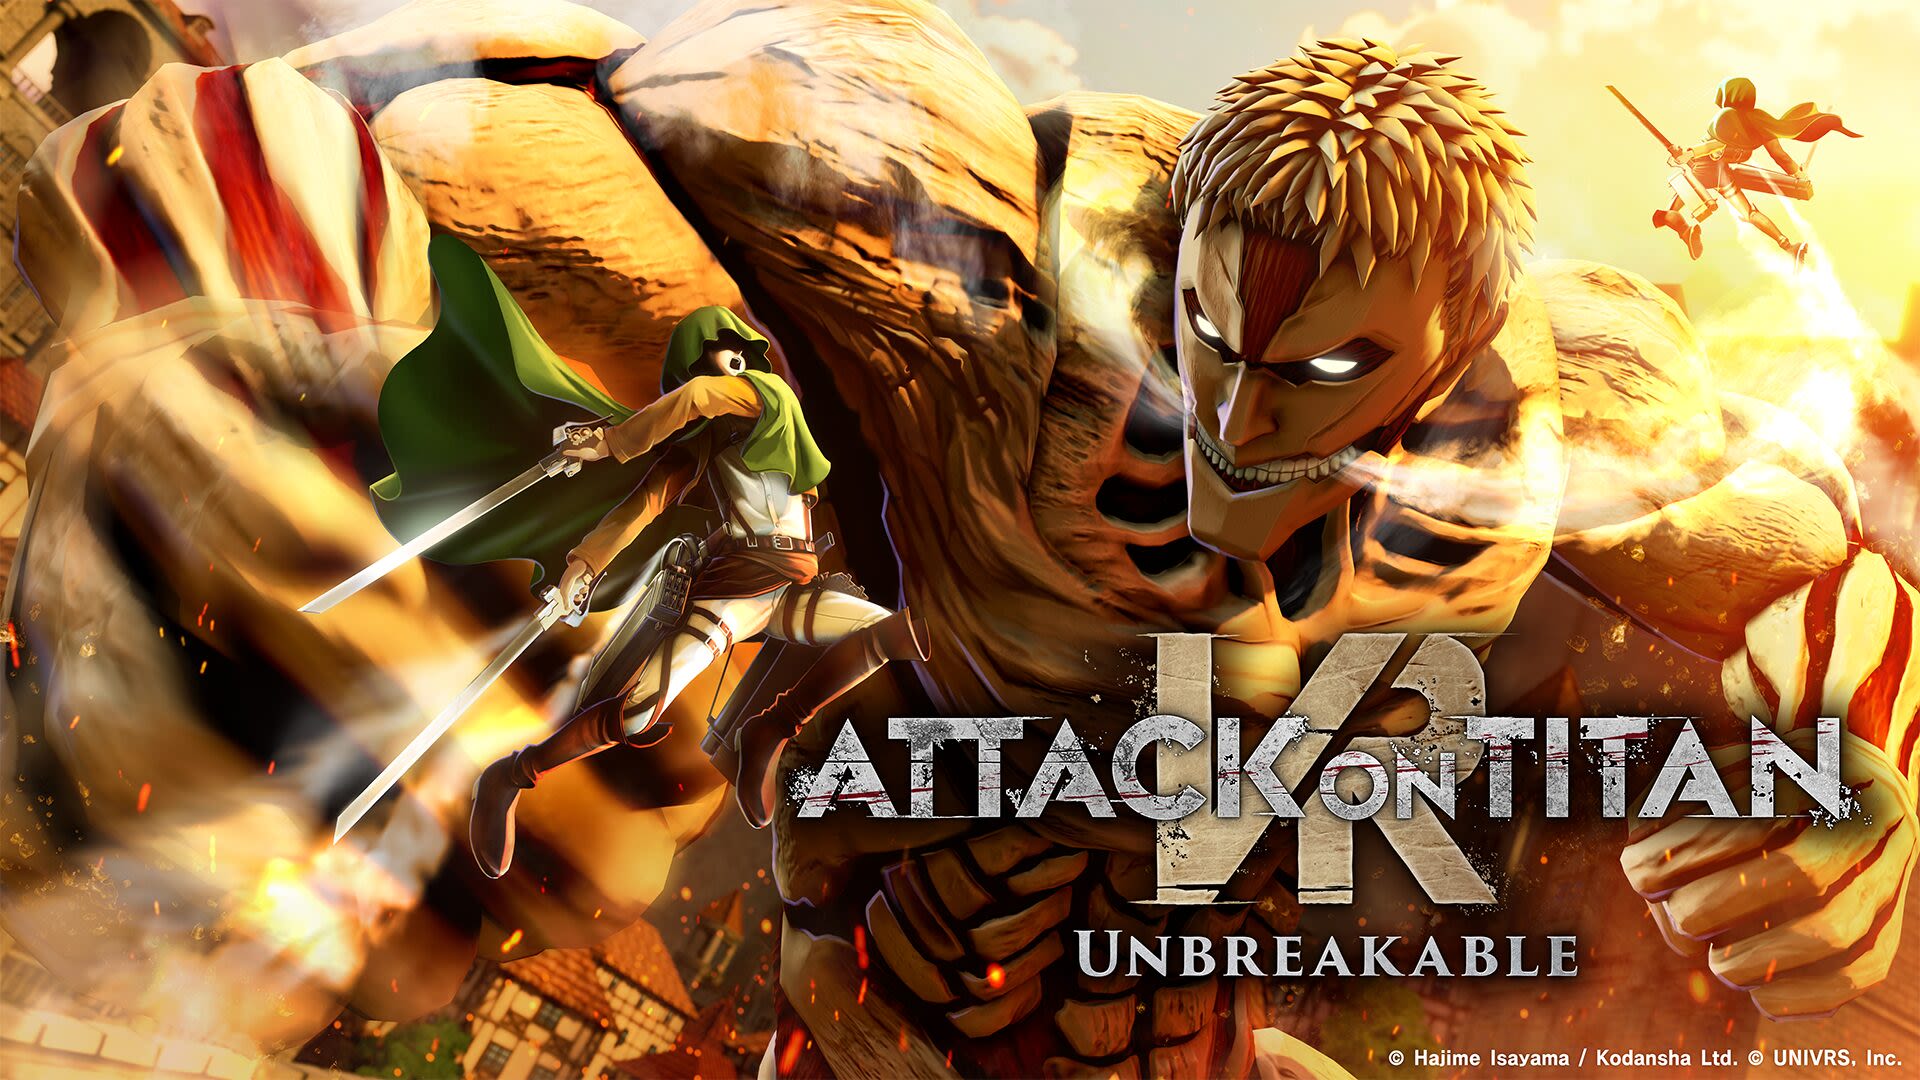 Attack on Titan VR: Unbreakable launches in Early Access on July 23